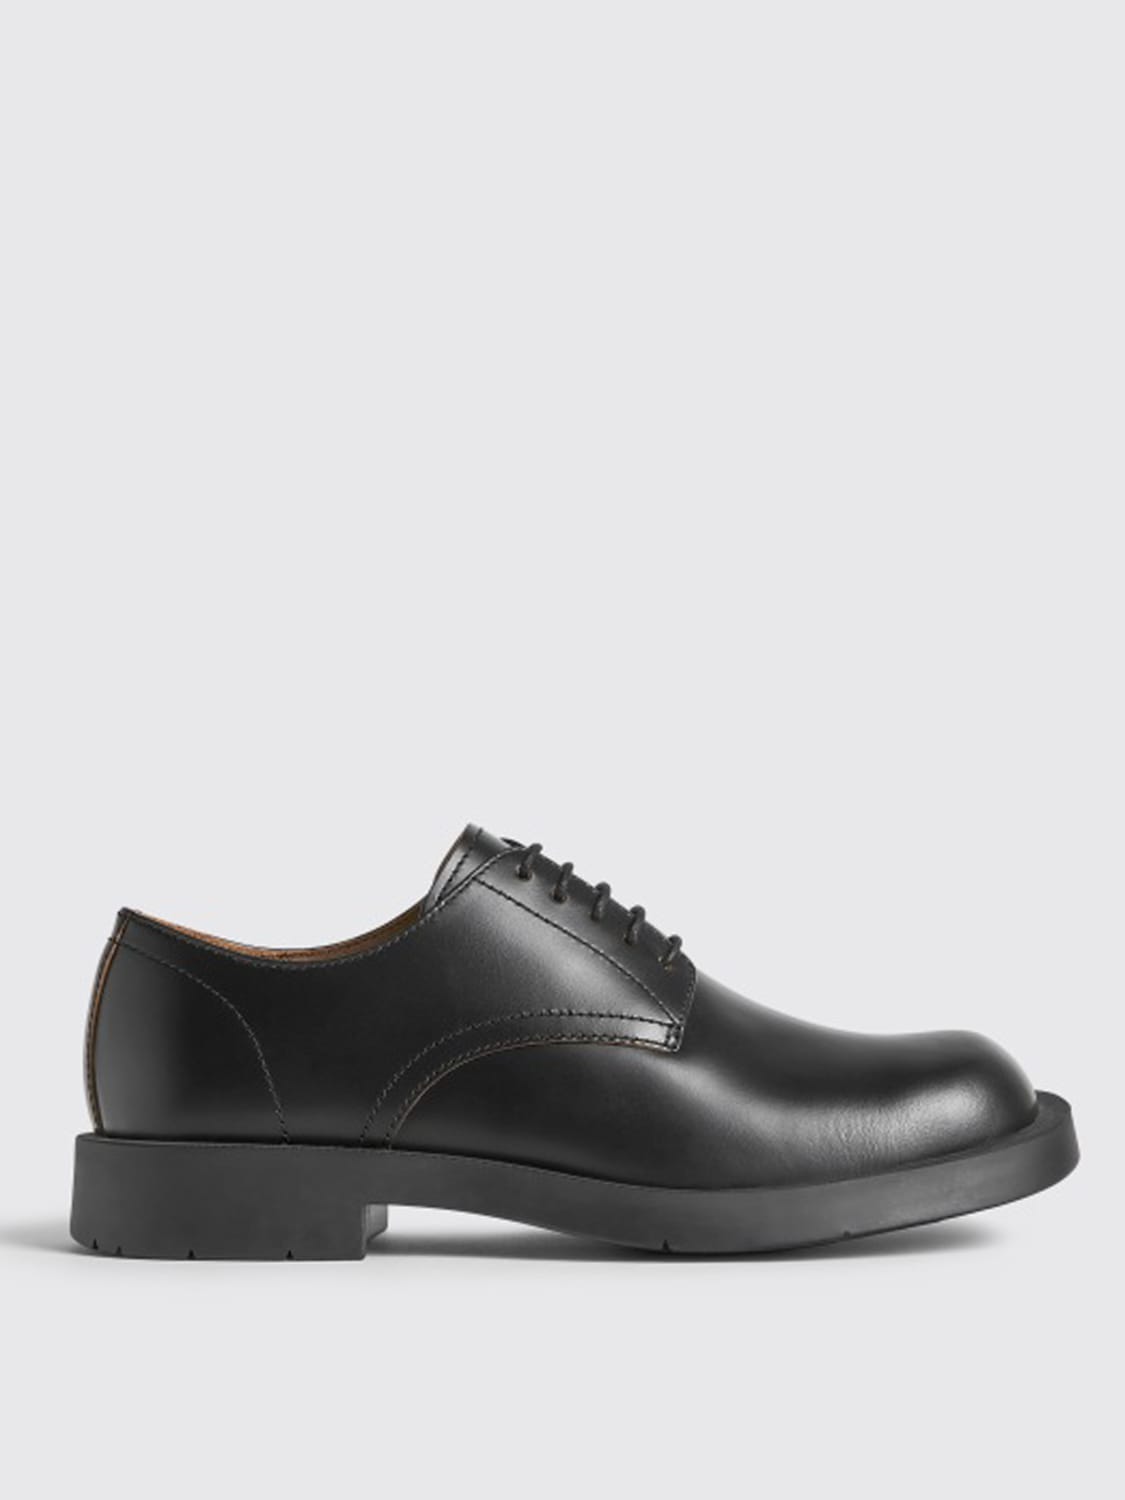 Mil 1978 CamperLab derby shoes in leather